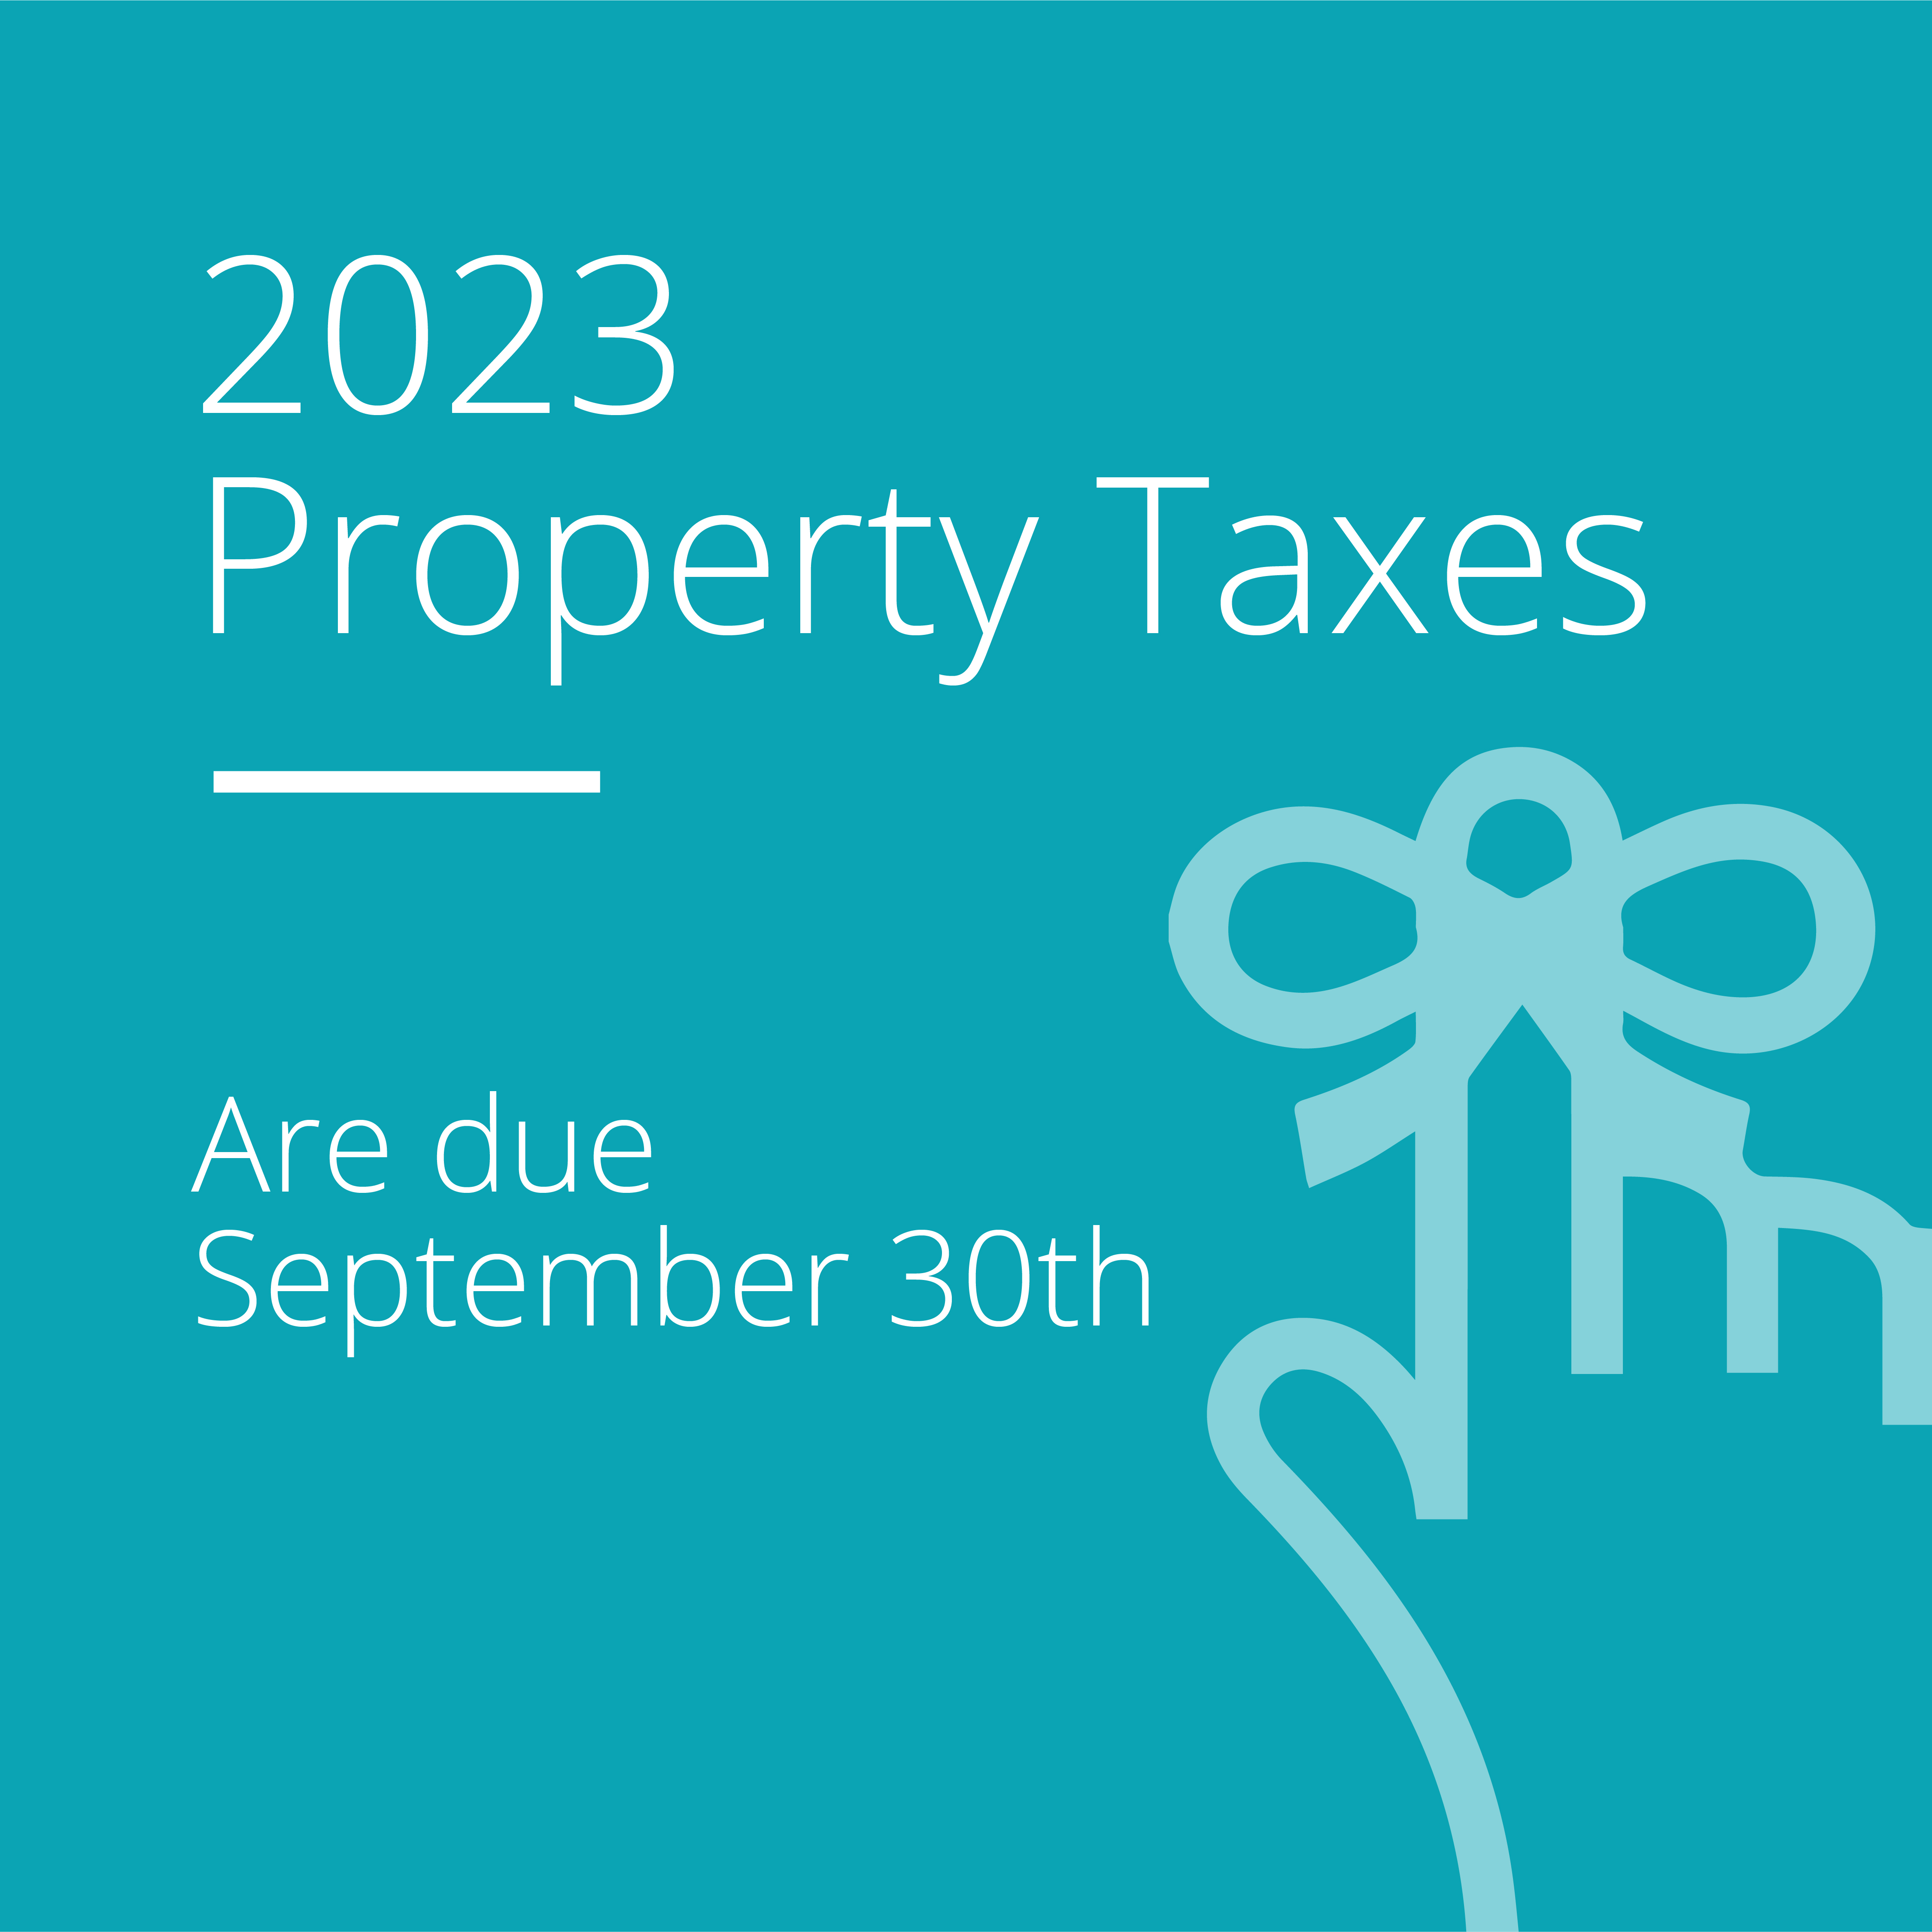 Property Taxes are due September 30th